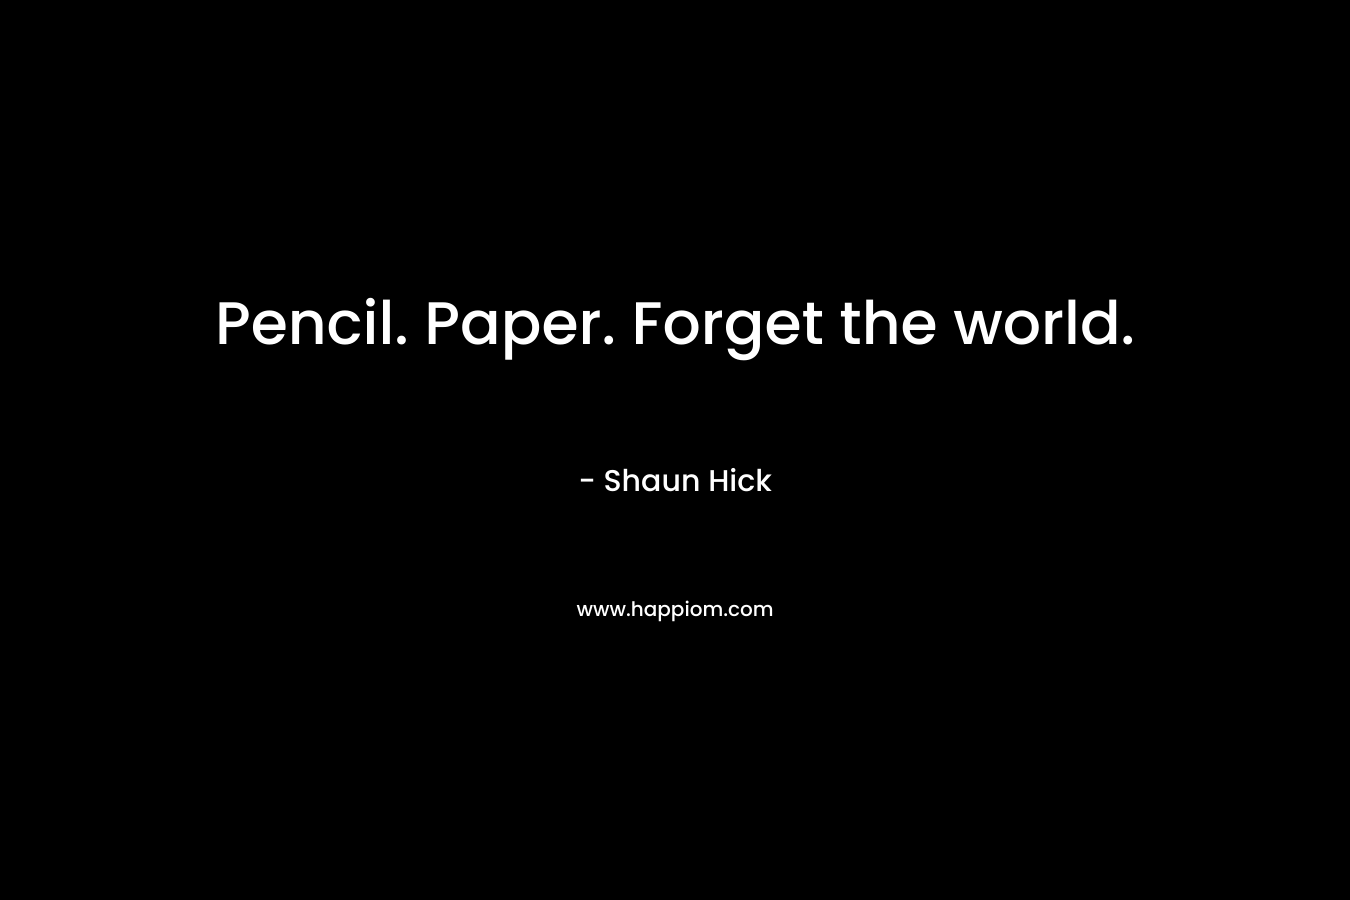 Pencil. Paper. Forget the world. – Shaun Hick